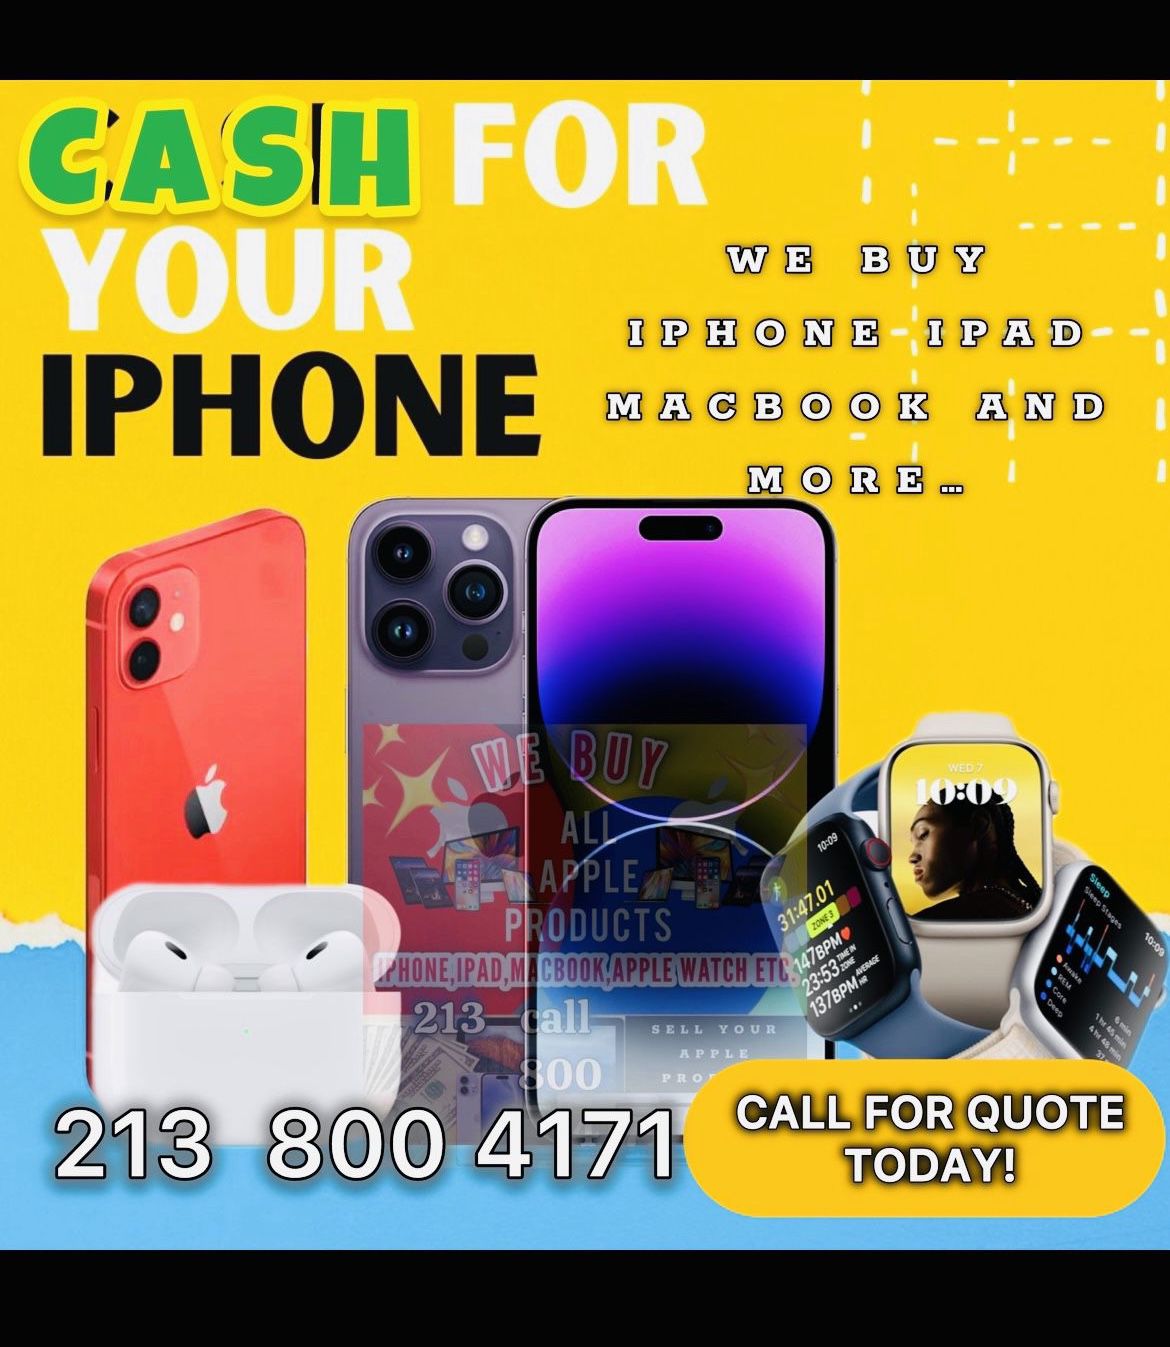 New Plus$max iPad 15 Max Pro iPhone Samsung Phone  Vision Galaxy Buyer Apple 🔝AirPods MacBook  Top Cash💰AirPods 